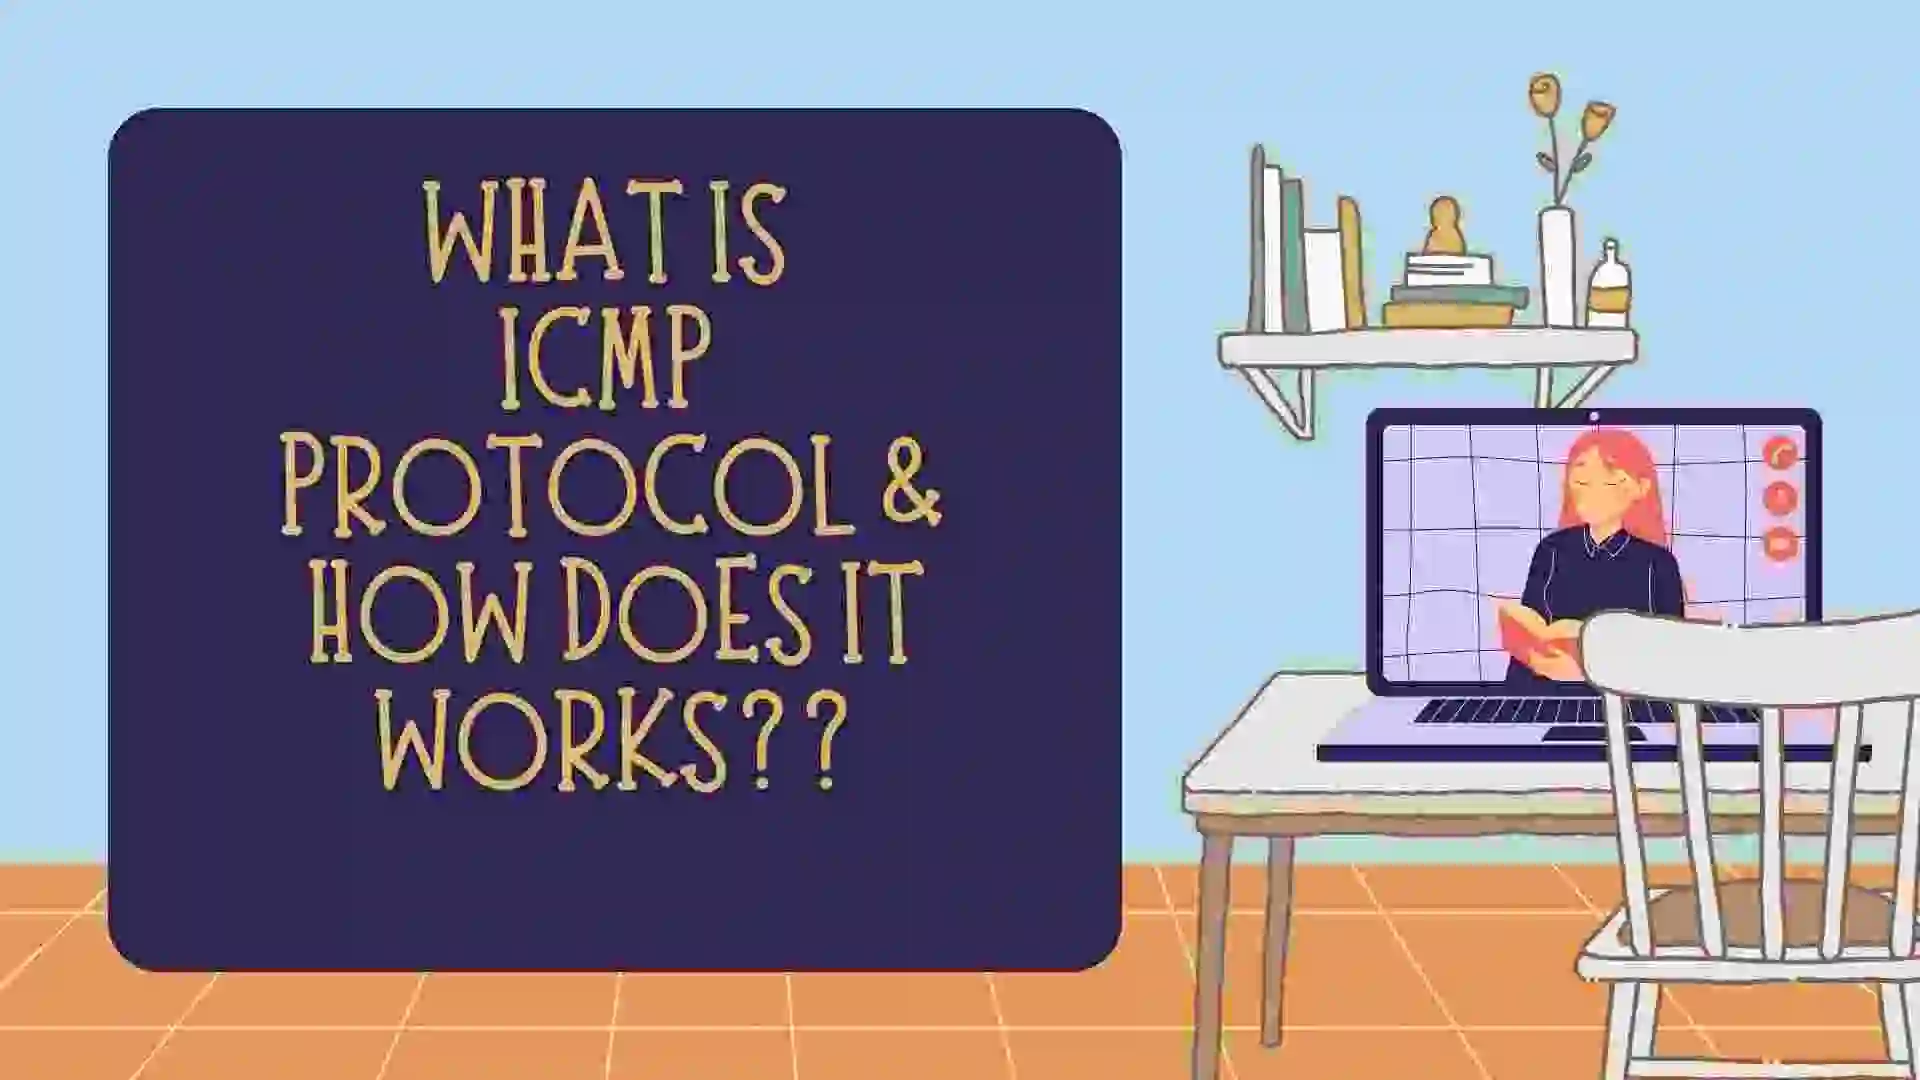 The primary purpose of ICMP is to report errors and other conditions that affect the delivery of IP packets.